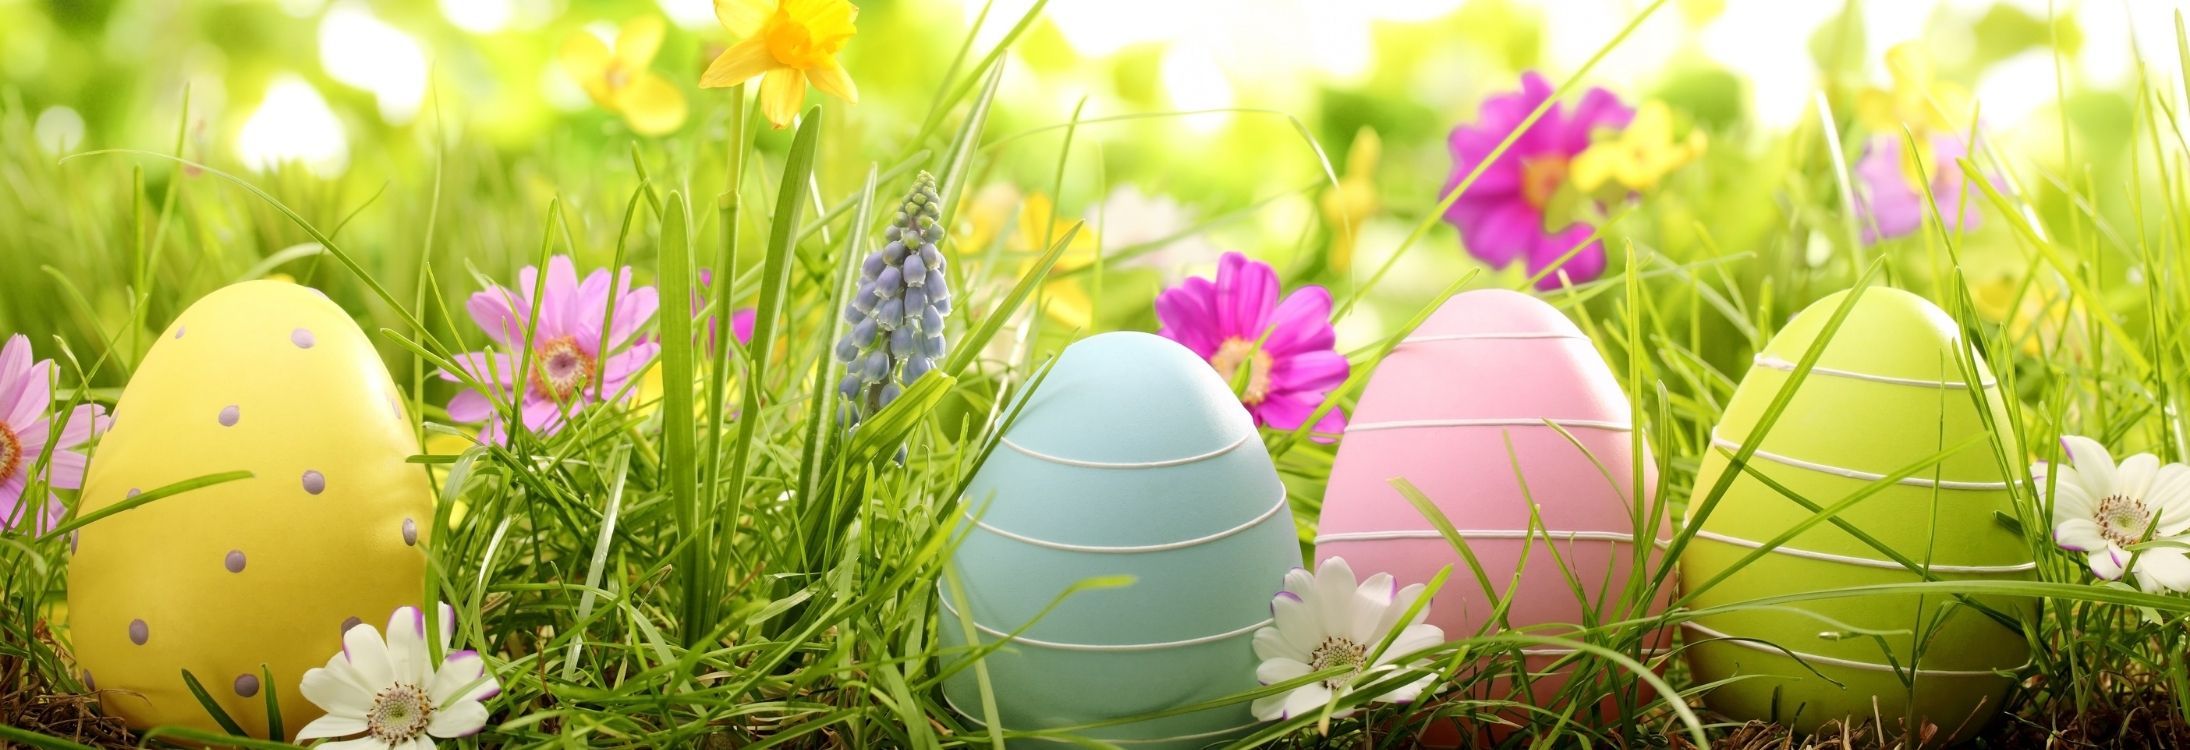 Places to visit over the Easter weekend